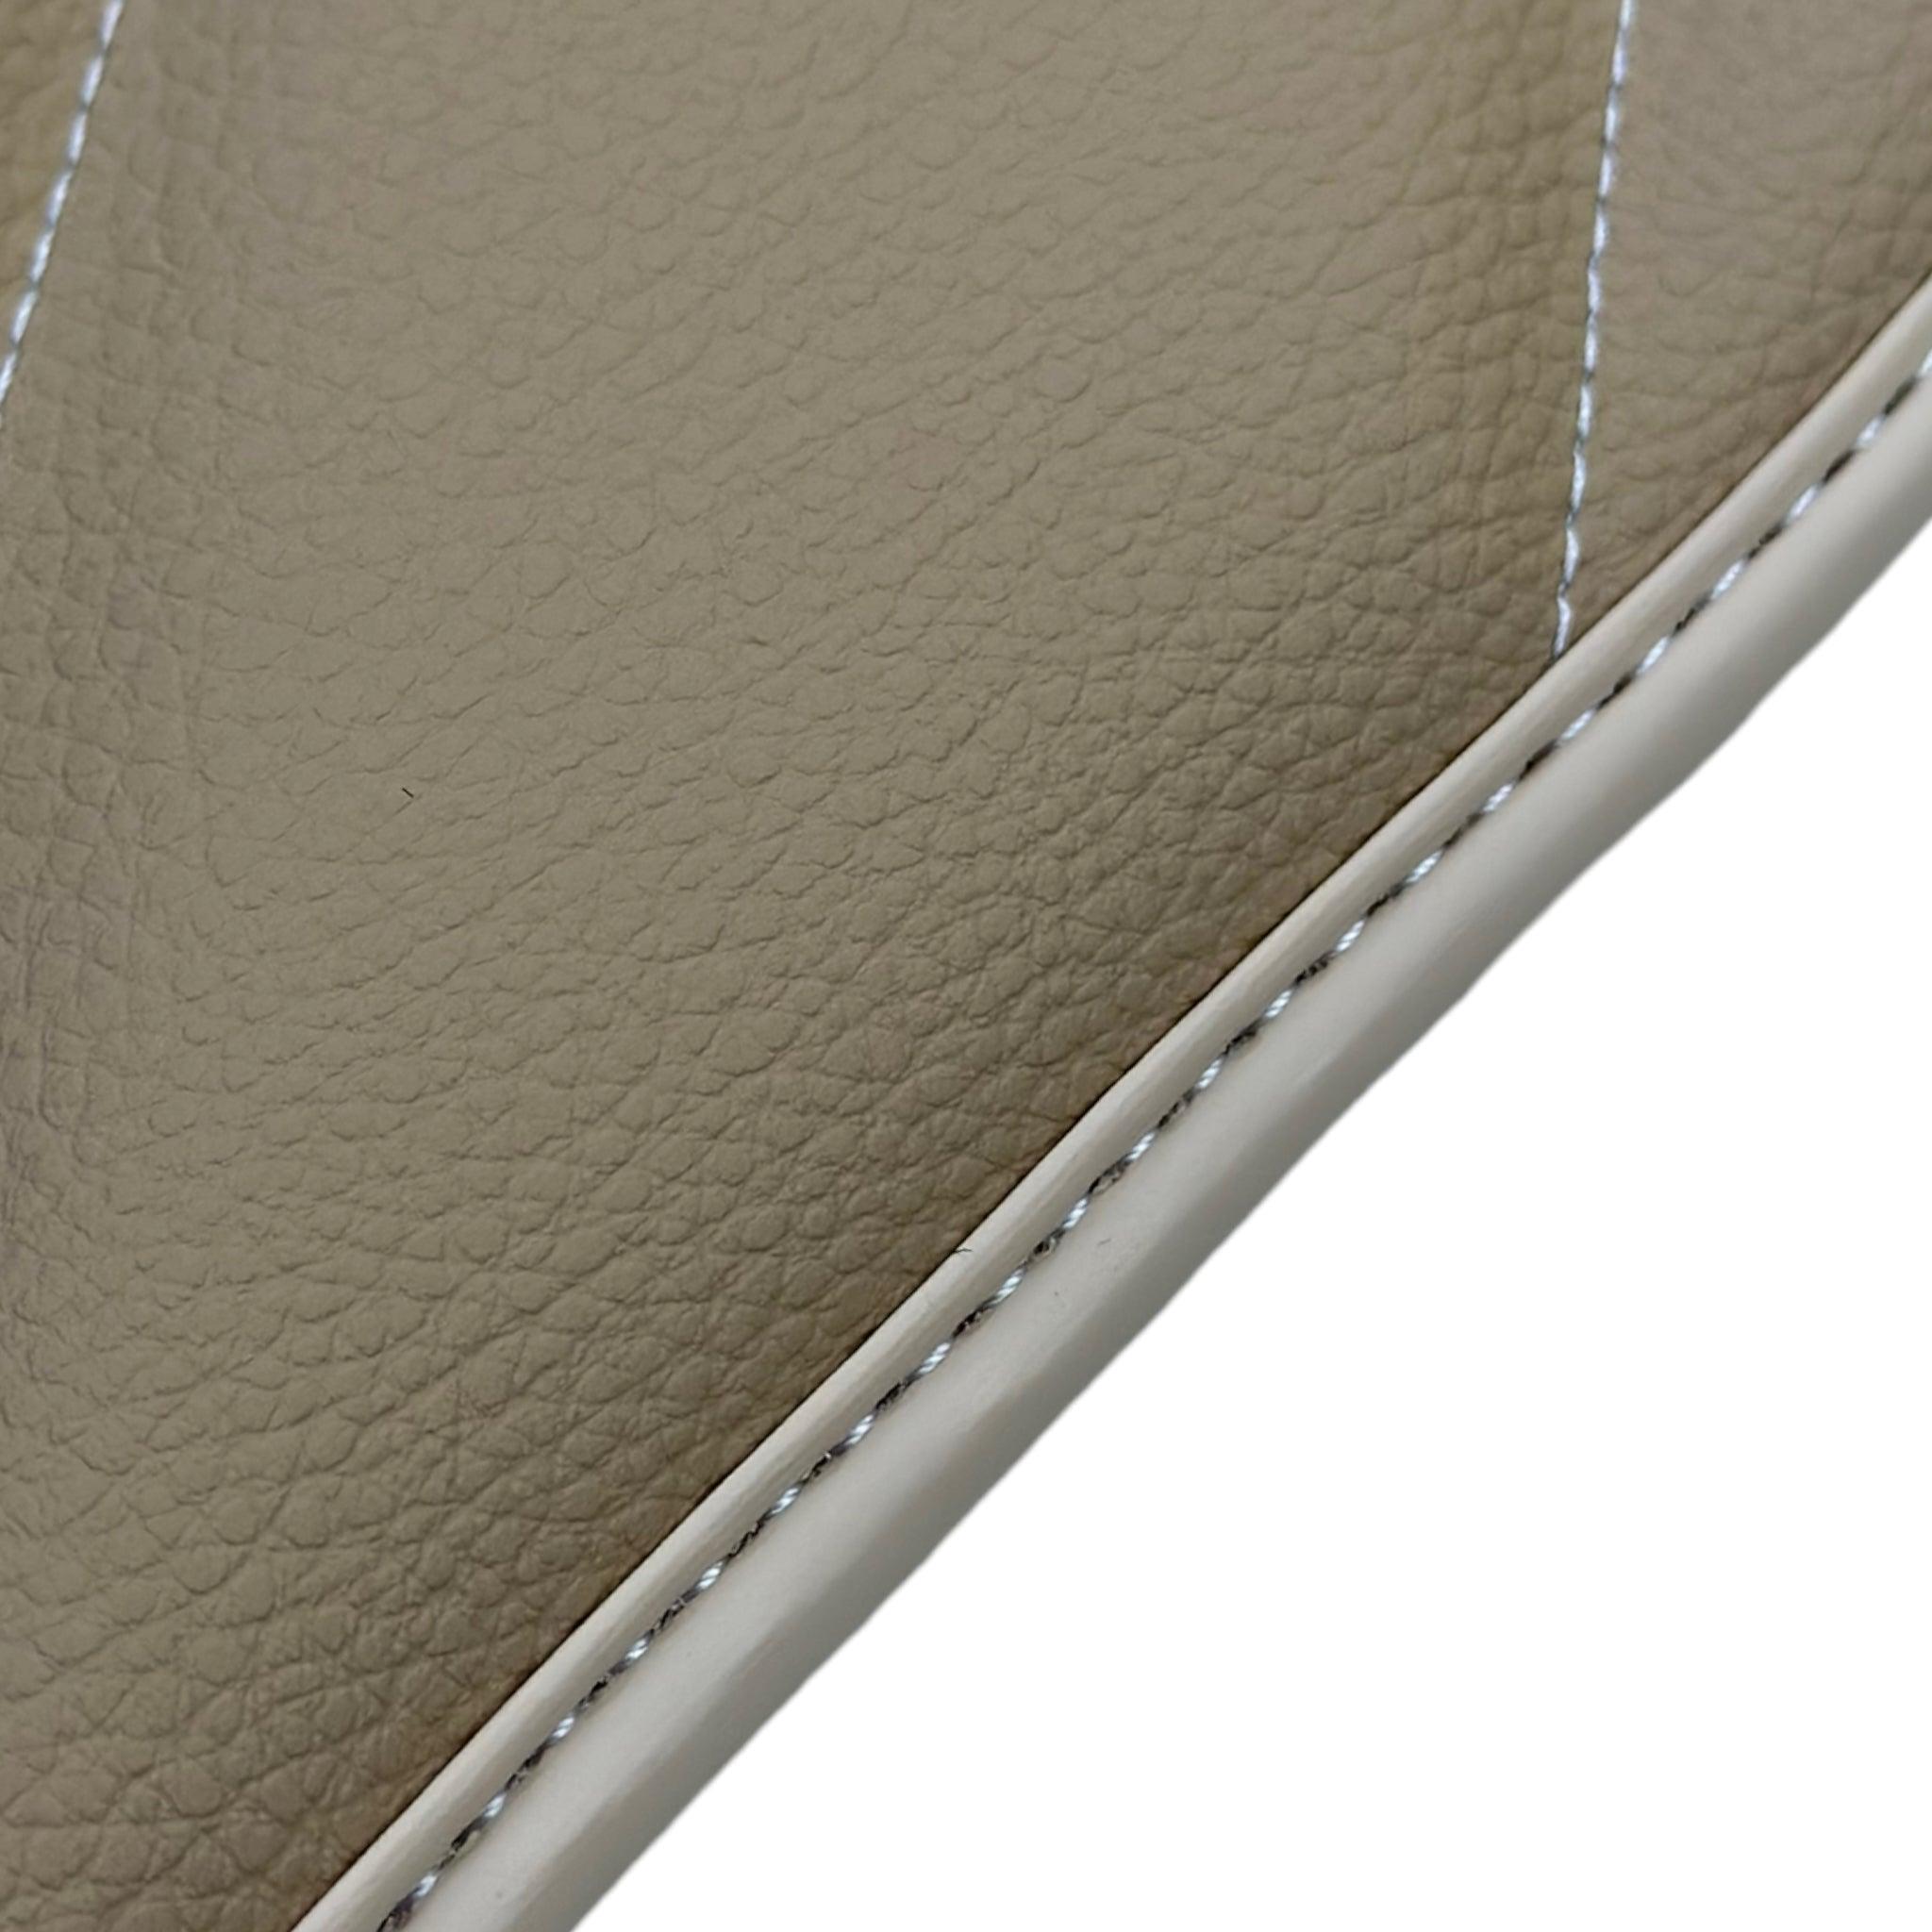 Beige Leather Floor Mats For Mercedes Benz GLE-Class W166 Allrounder (2015-2019)